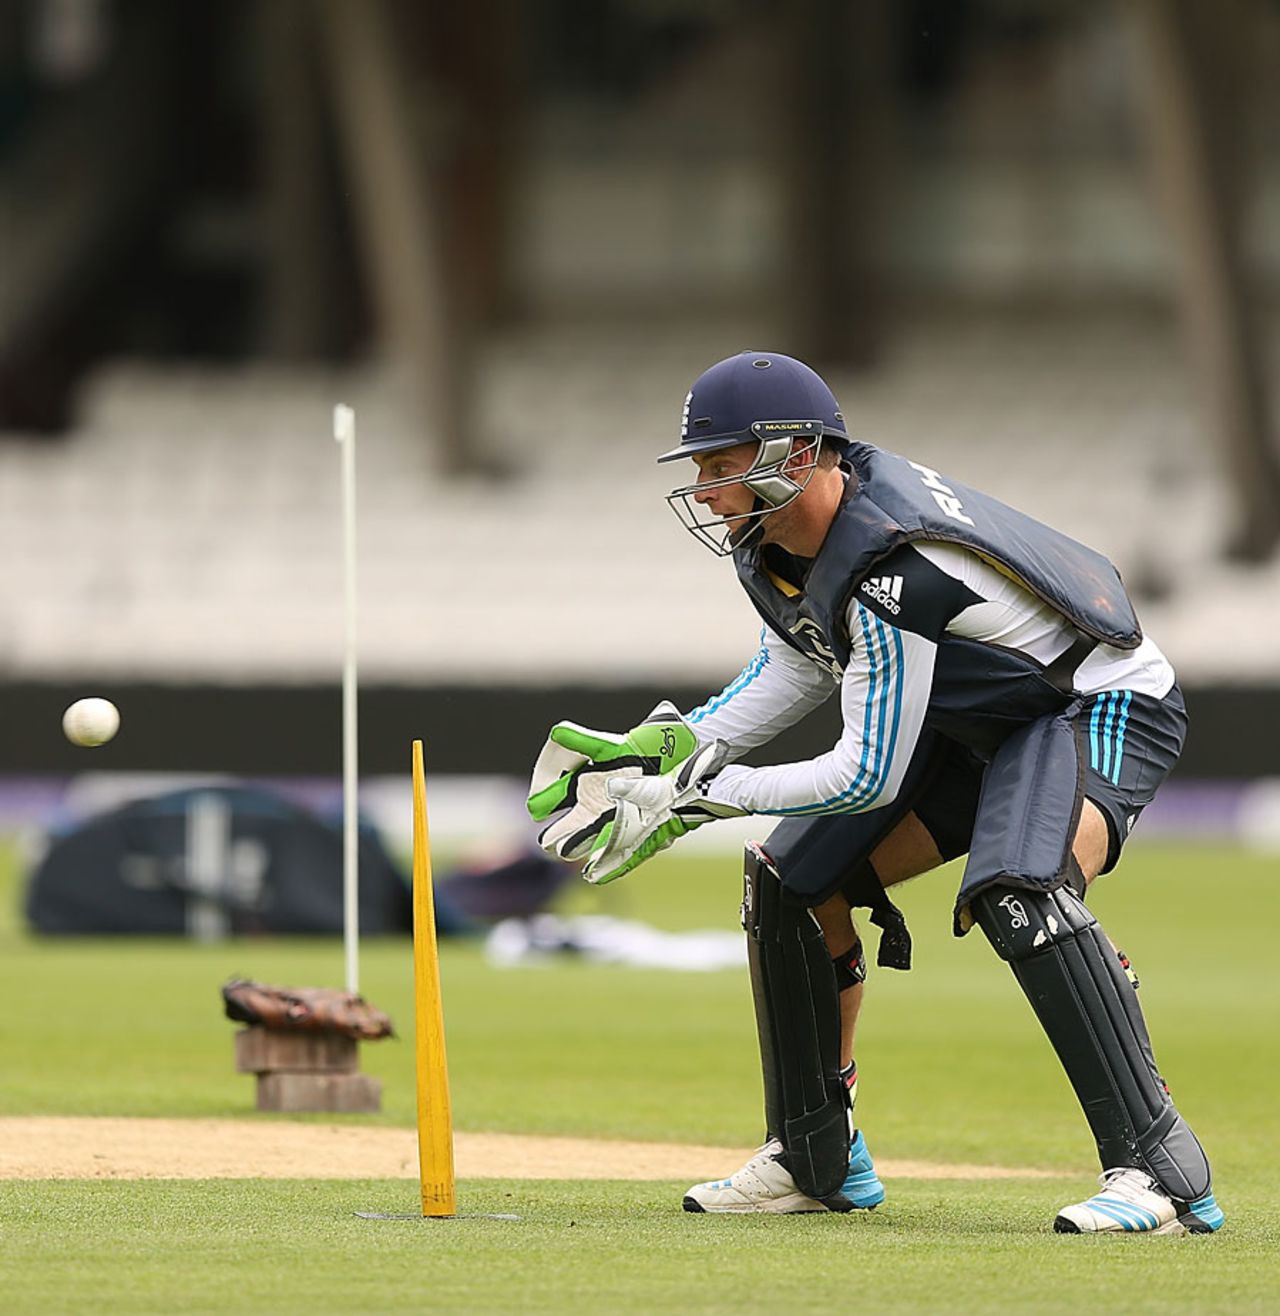 Jos Buttler wears some interesting padding as he trains, The Oval, May 21, 2014